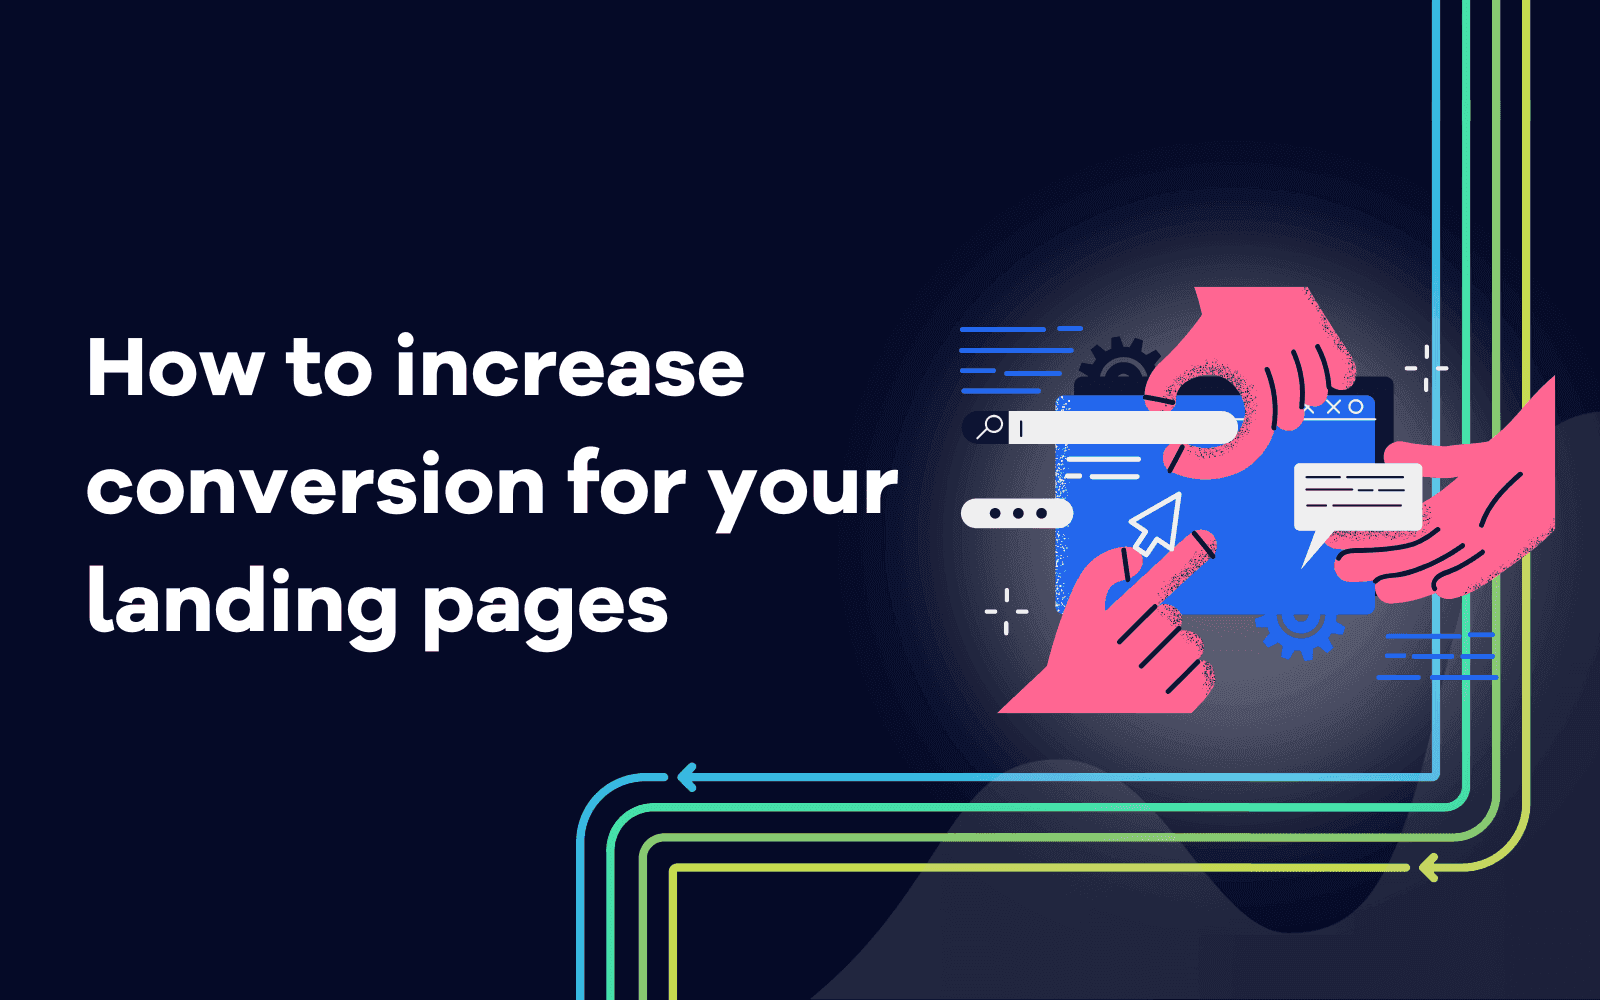 How to increase conversion for your landing pages